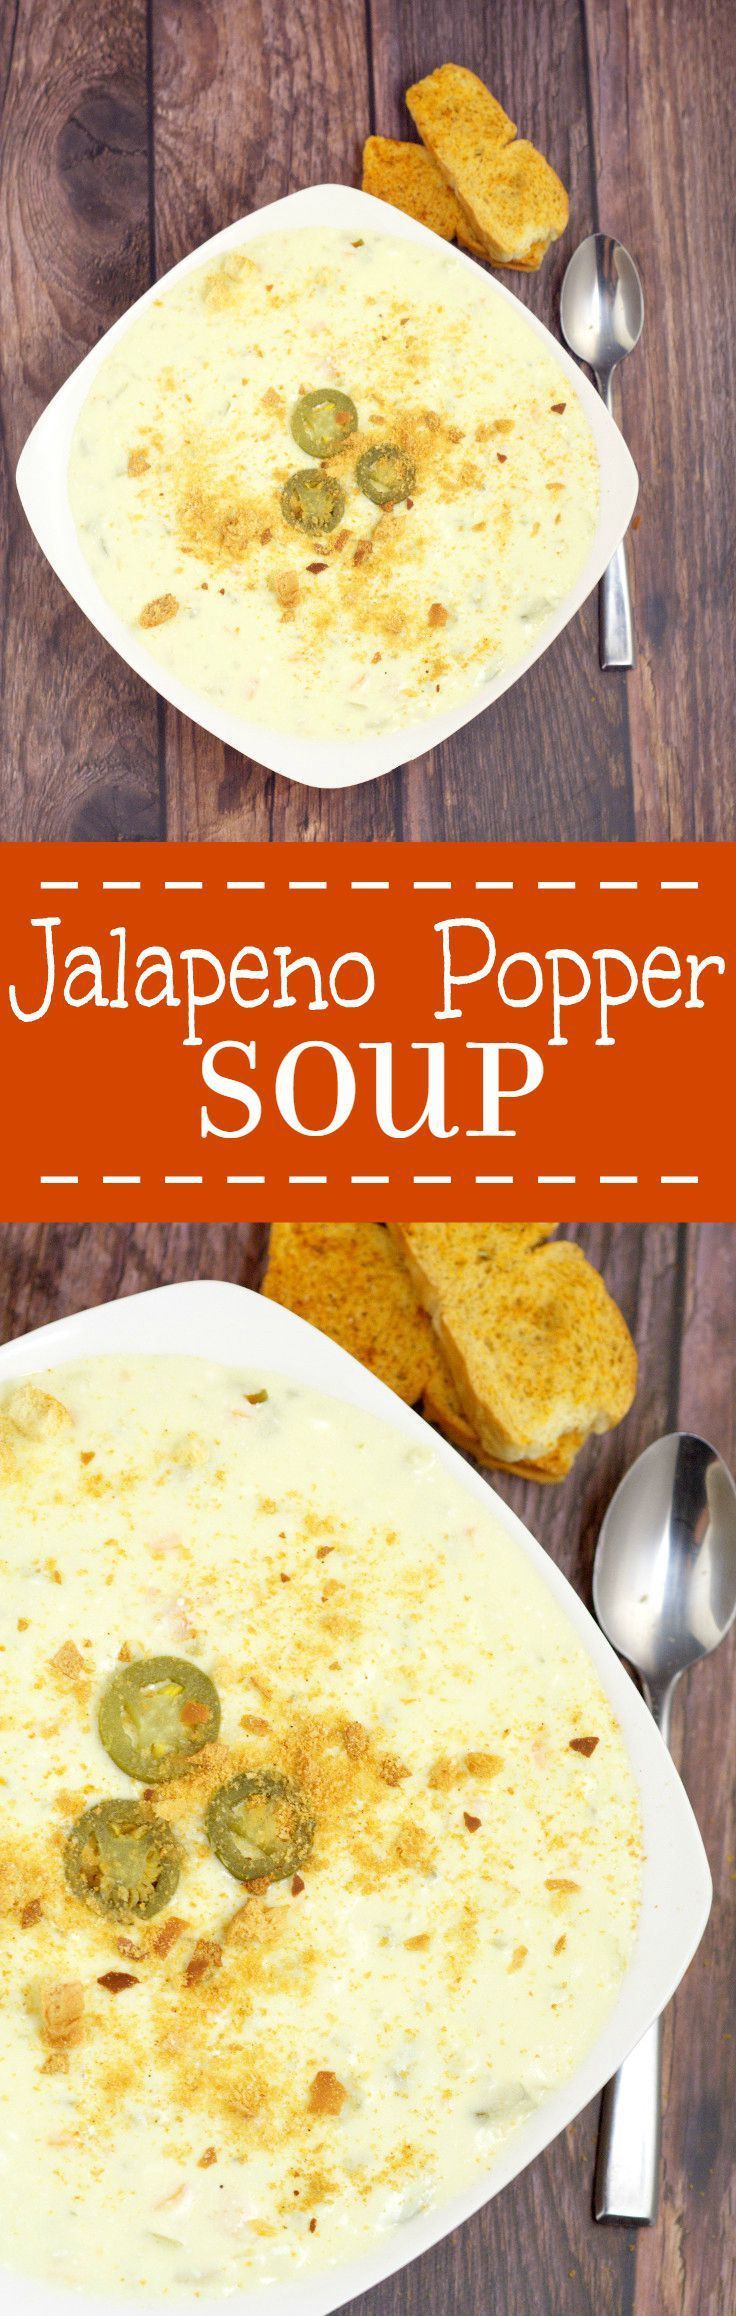 Creamy and warm with a kick of spicy, this Jalapeno Popper Soup recipe makes eating appetizers for dinner totally okay! Tastes